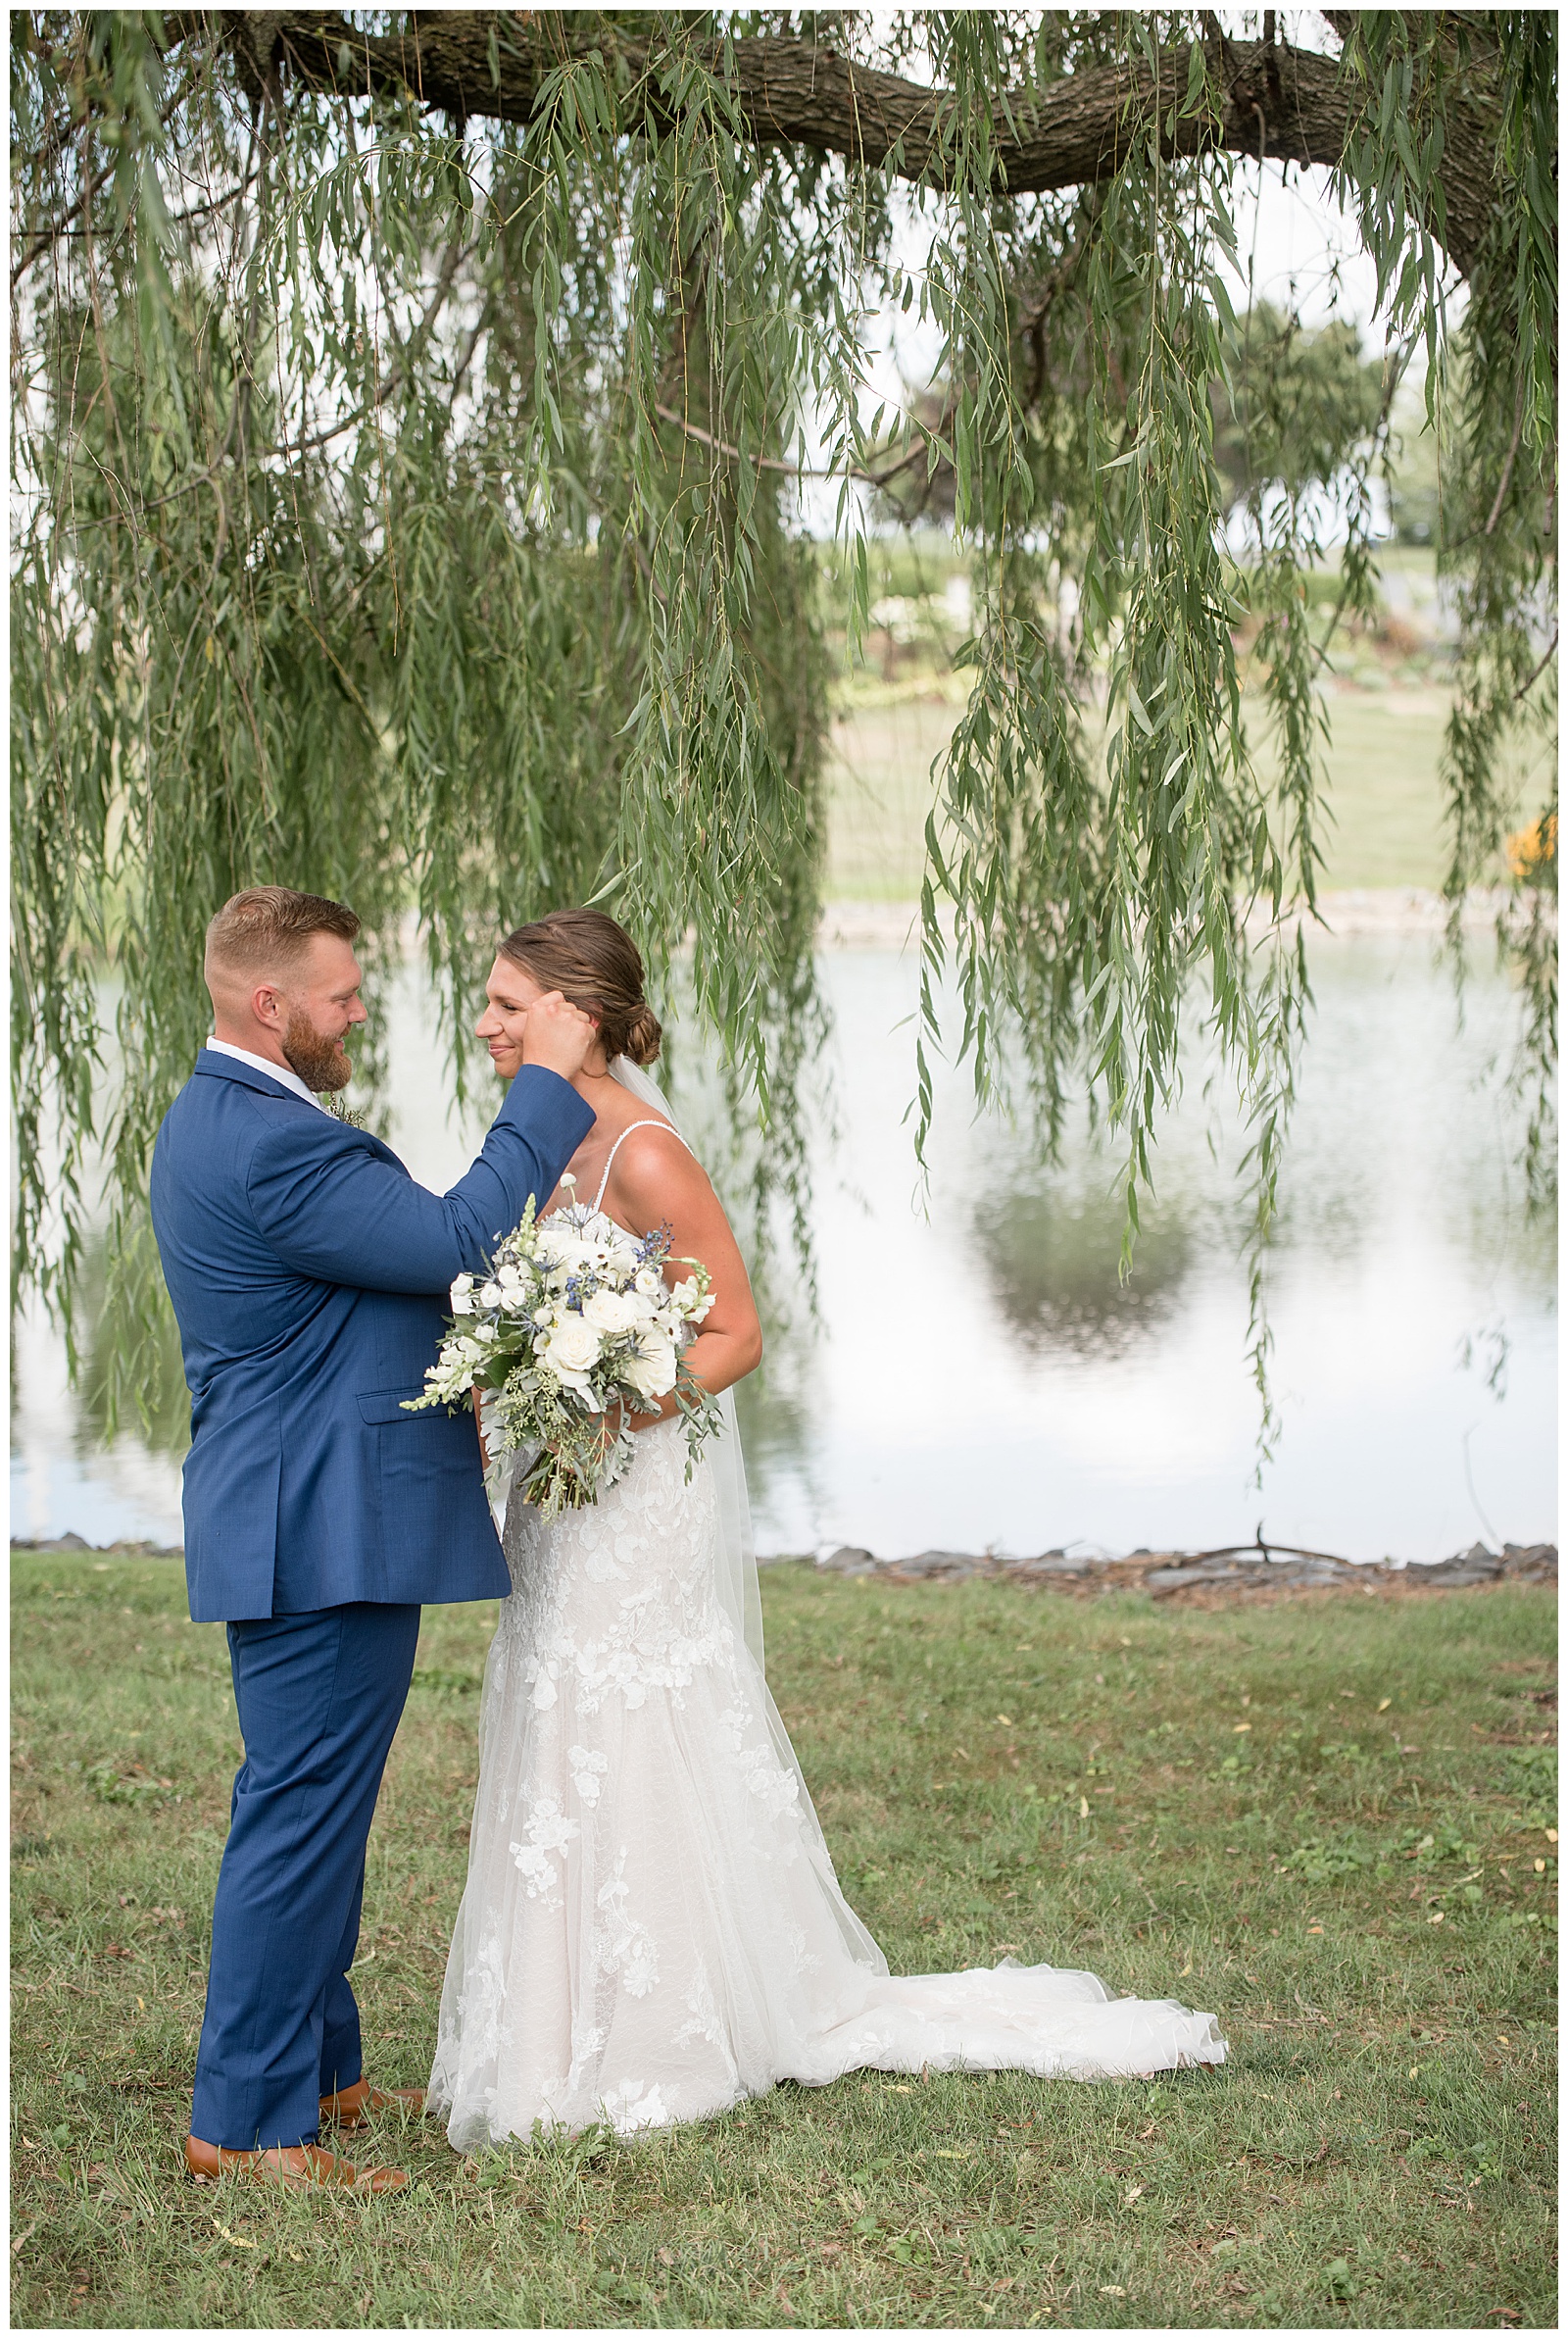 groom wiping bride's tear during first look moment by lake and willow tree at lakefield weddings